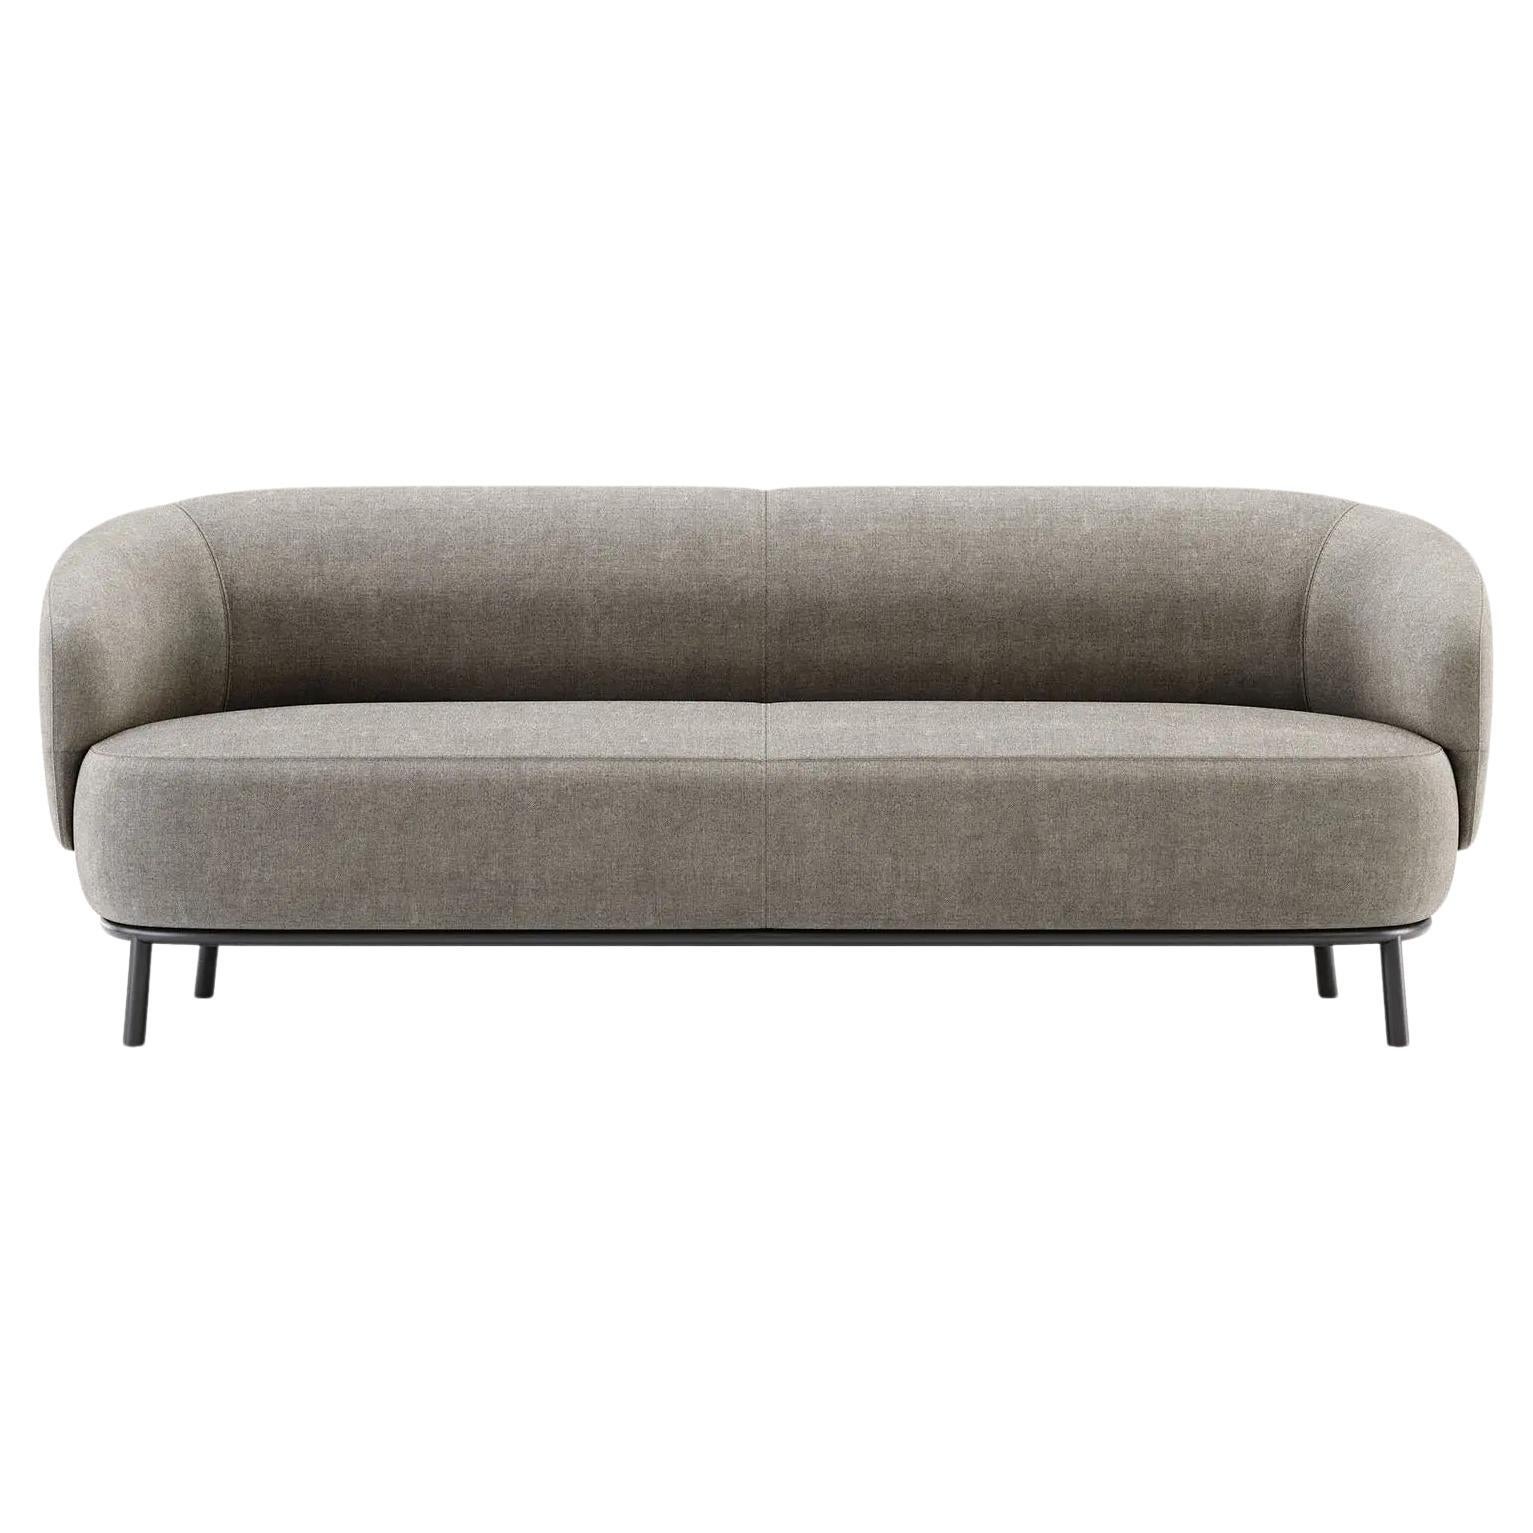 Modern Custom Made Sofa Featuring Horizontal Bands of Haute-Couture Stitching.